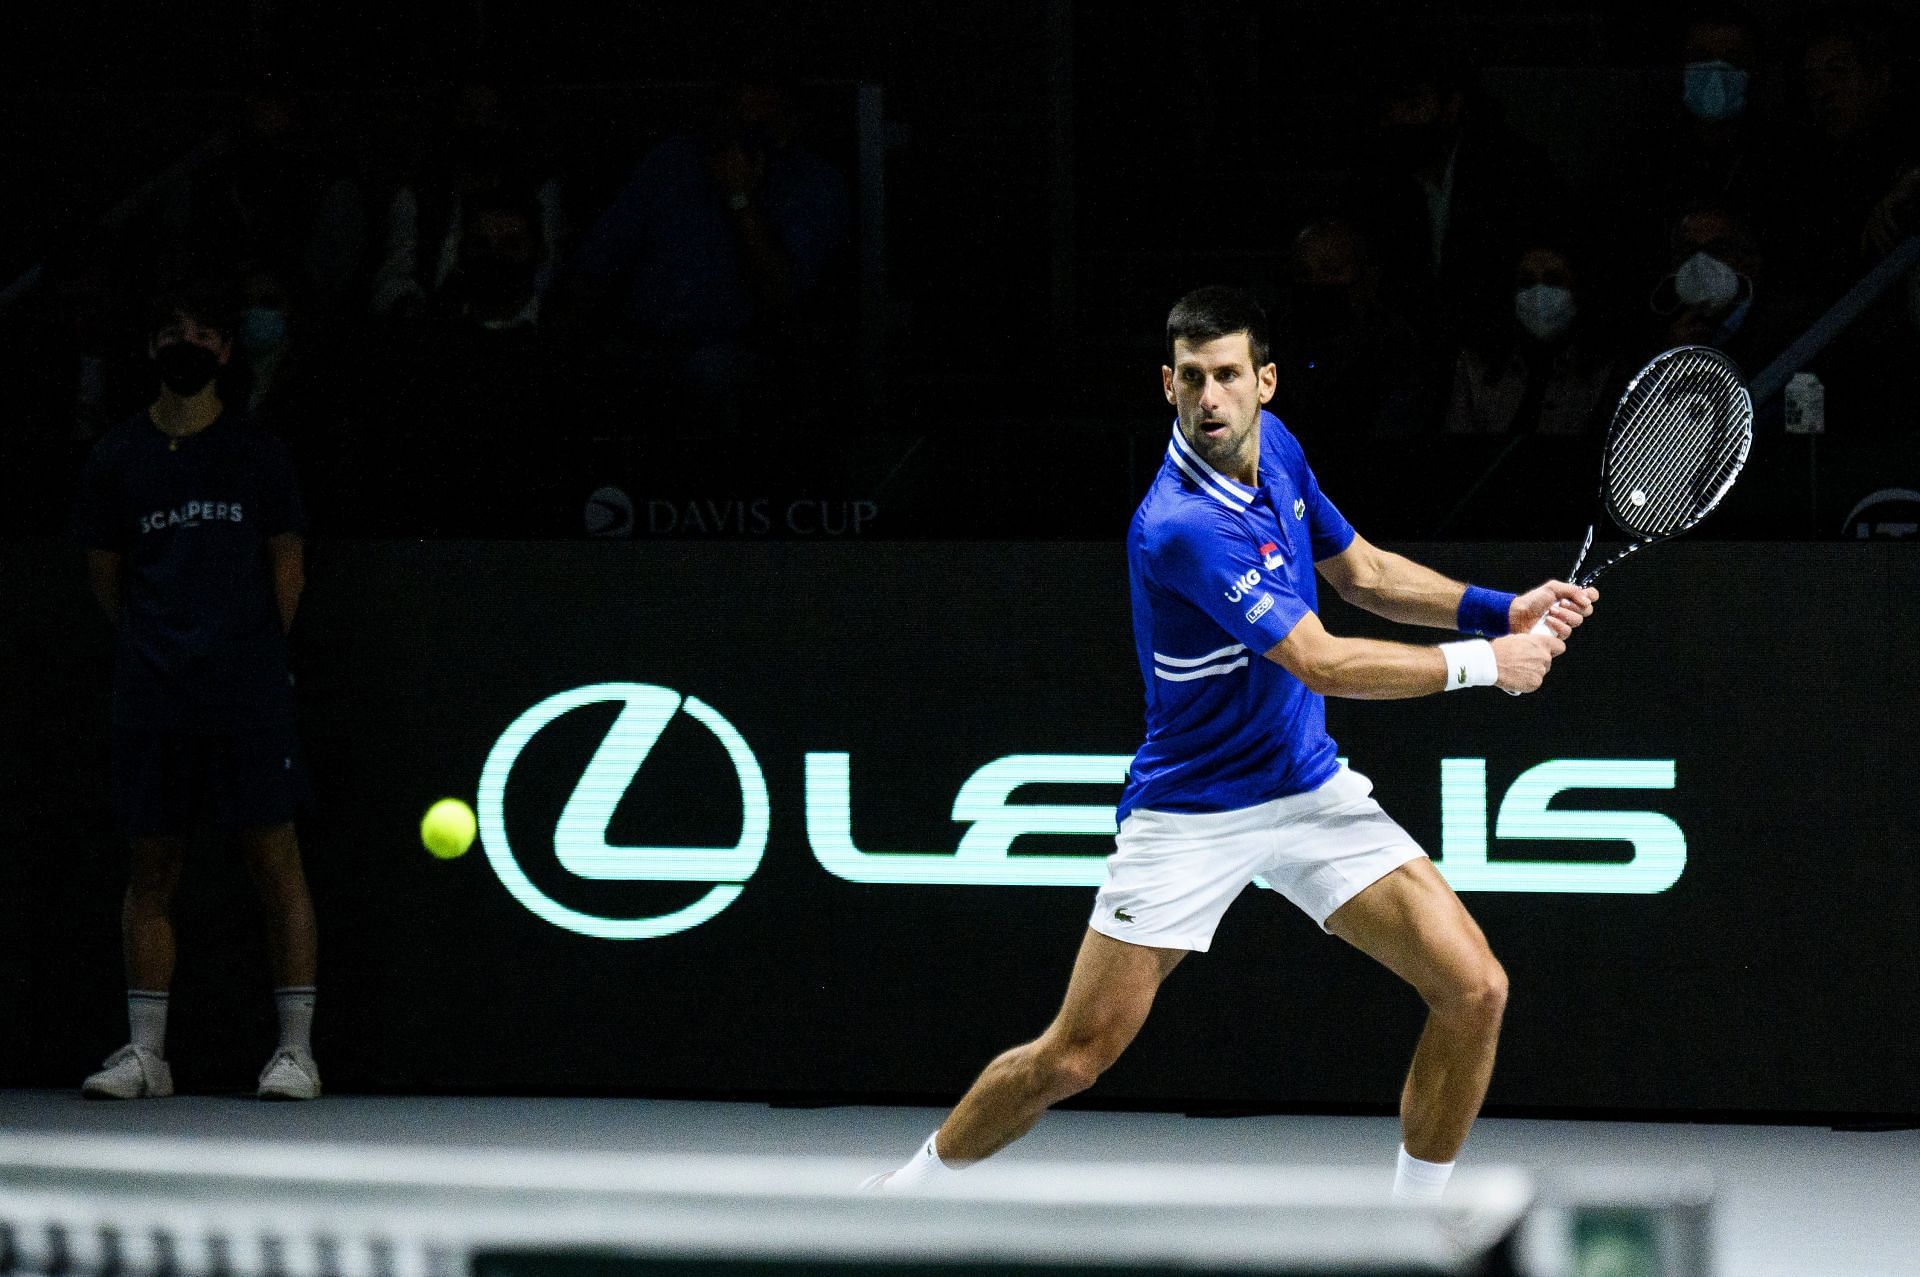 Novak Djokovic plays a backhand against Marin Cilic during a 2021 Davis Cup Semifinal match at Madrid Arena pavilion